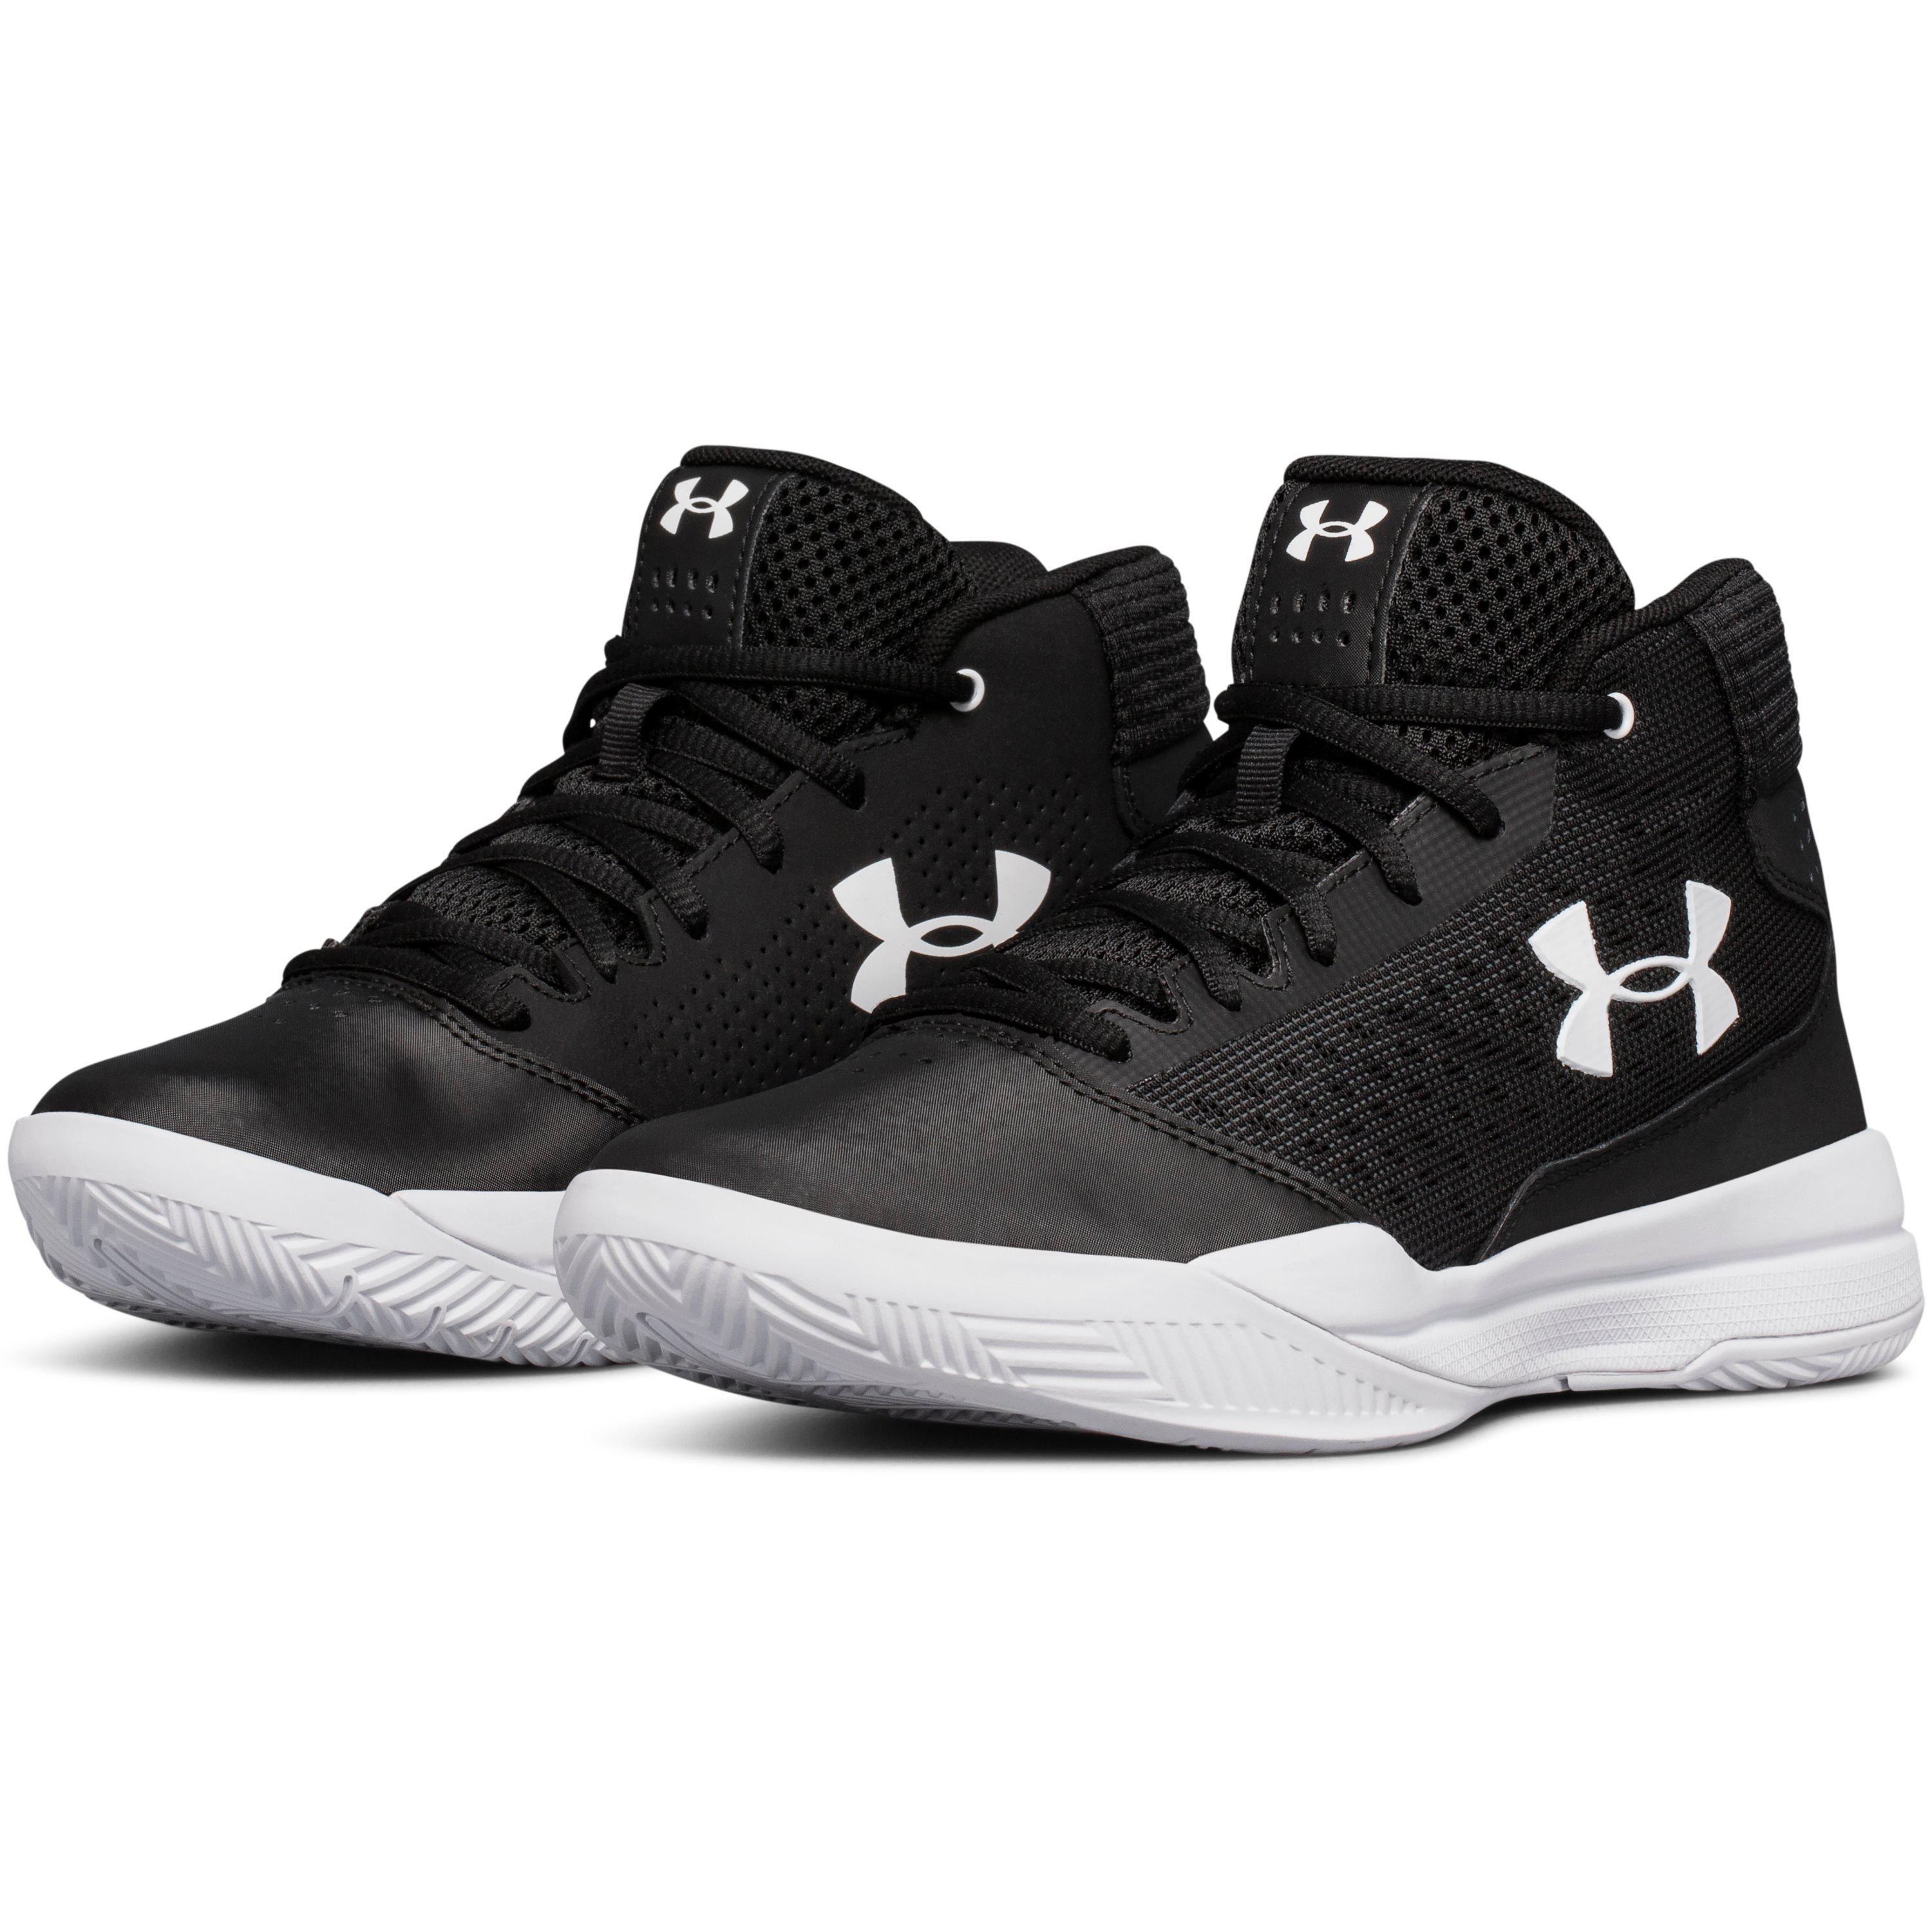 Under Armour Leather Women's Ua Jet 2017 Basketball Shoes in Black /White ( Black) | Lyst